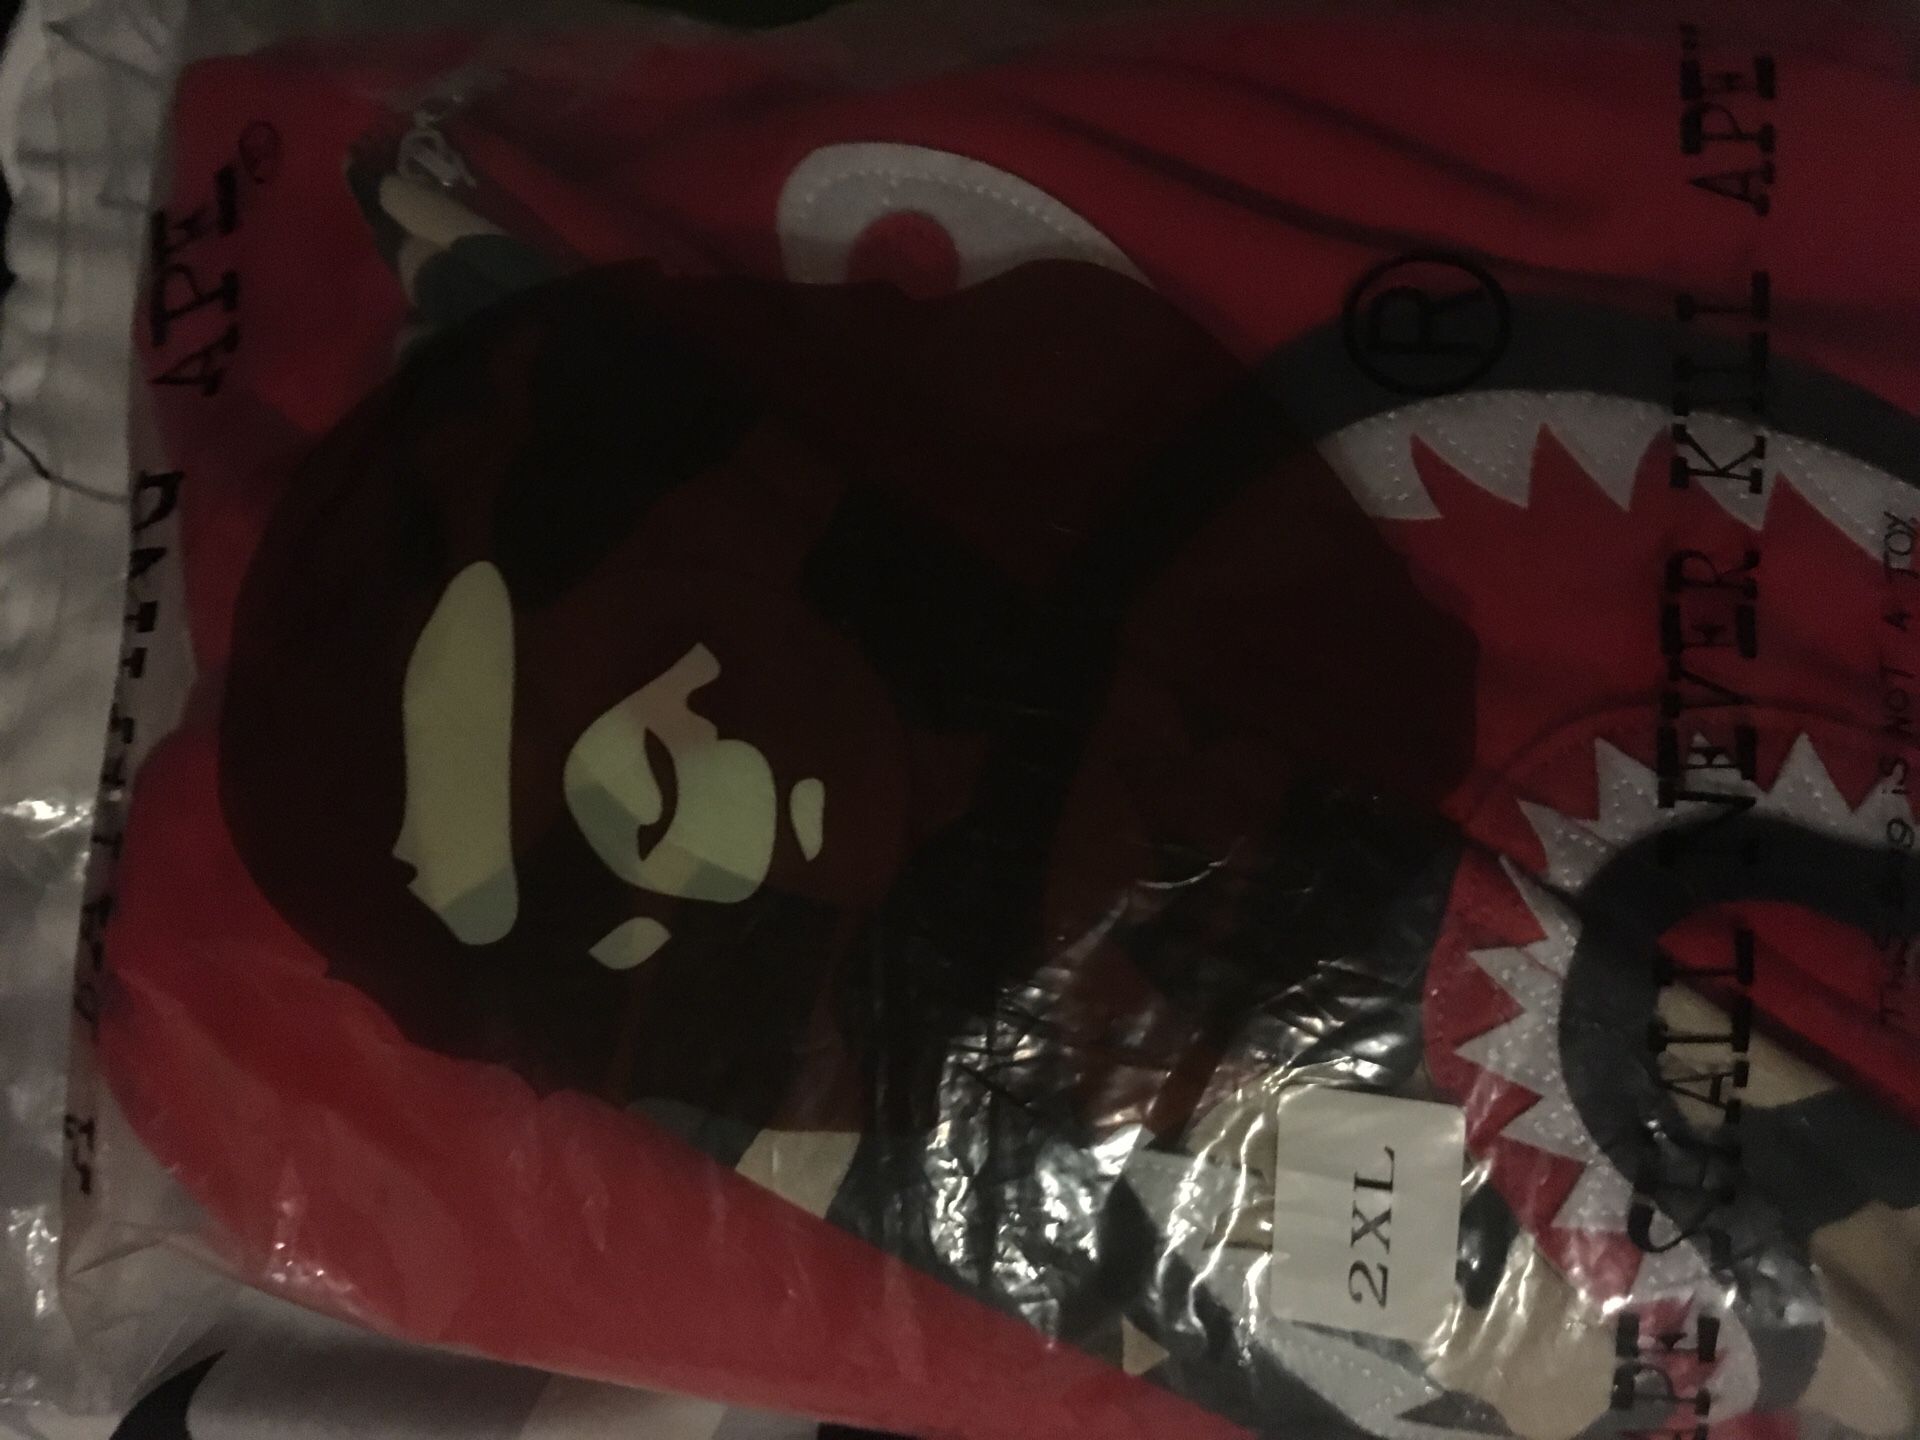 Bape hoodie looking for trades or a cost